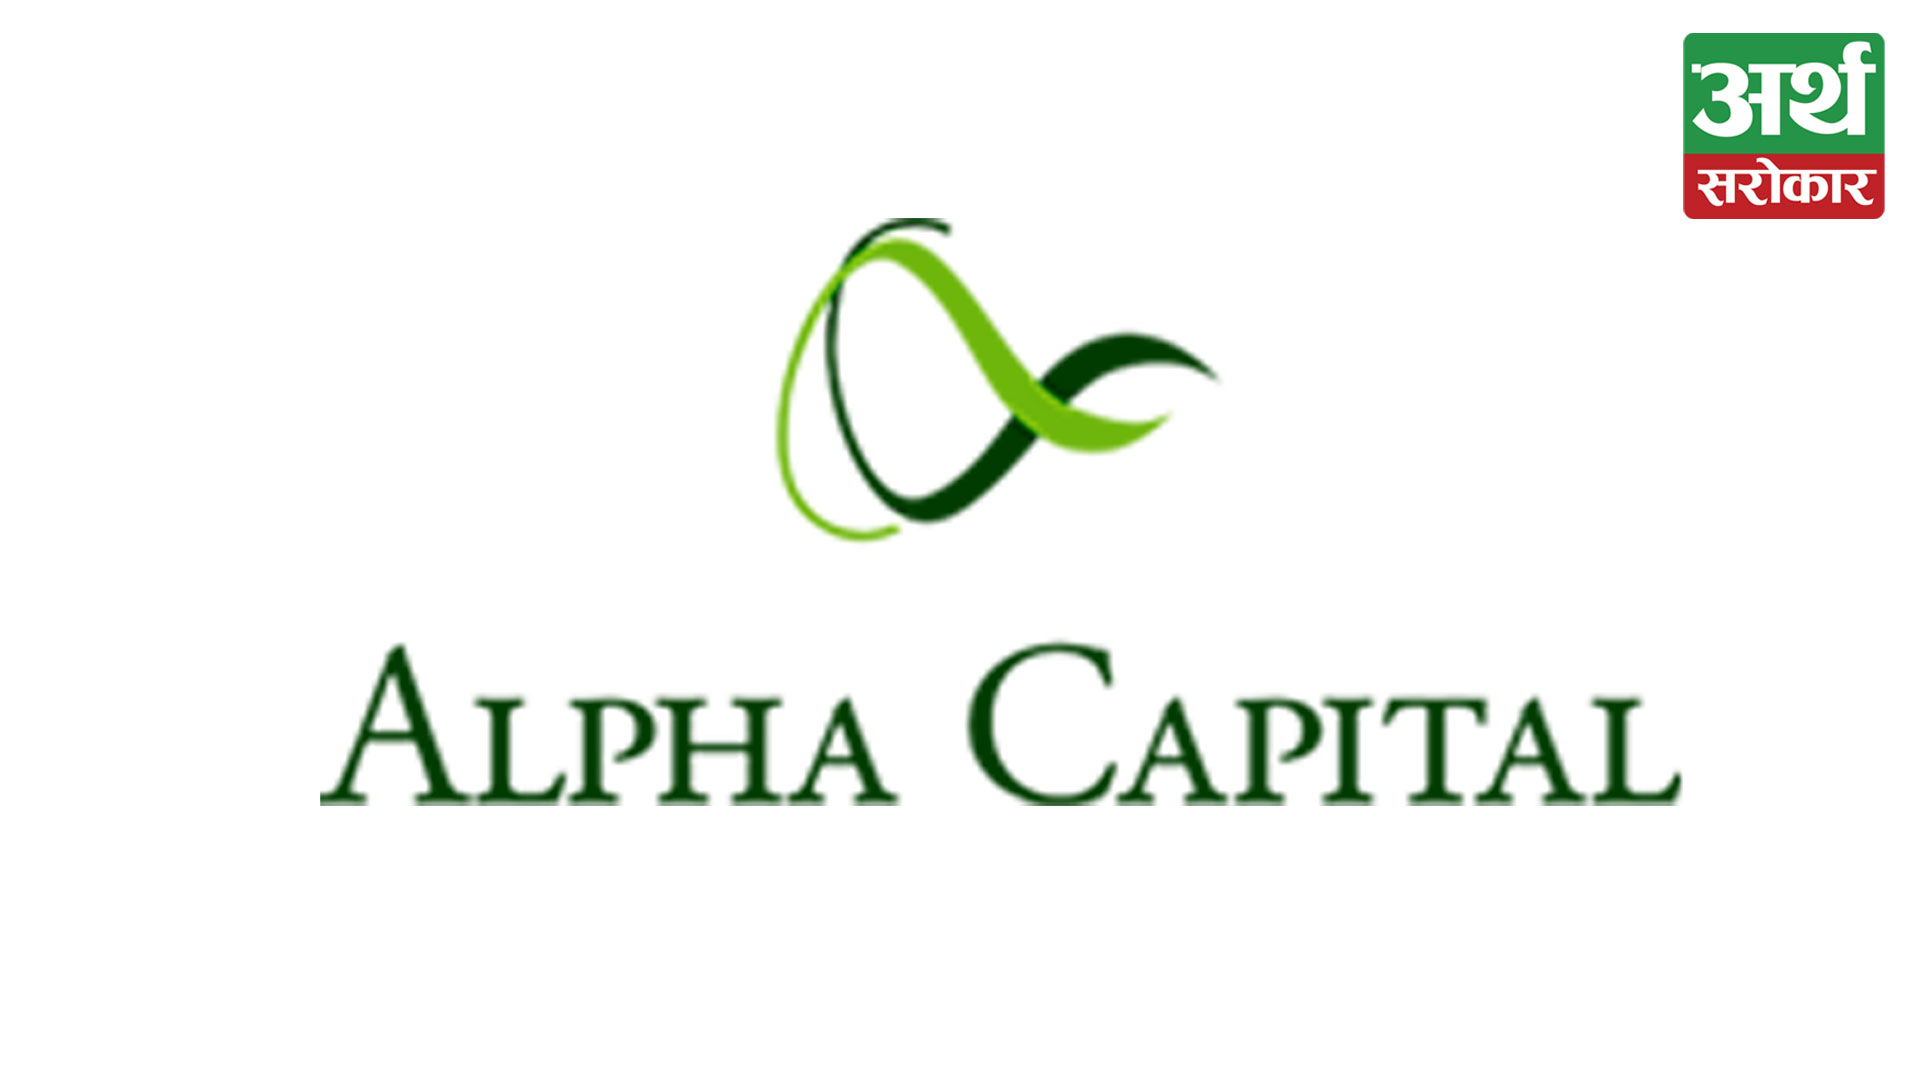 Alpha Capital announces the AGM, Proposal for an IPO at a premium price will be presented